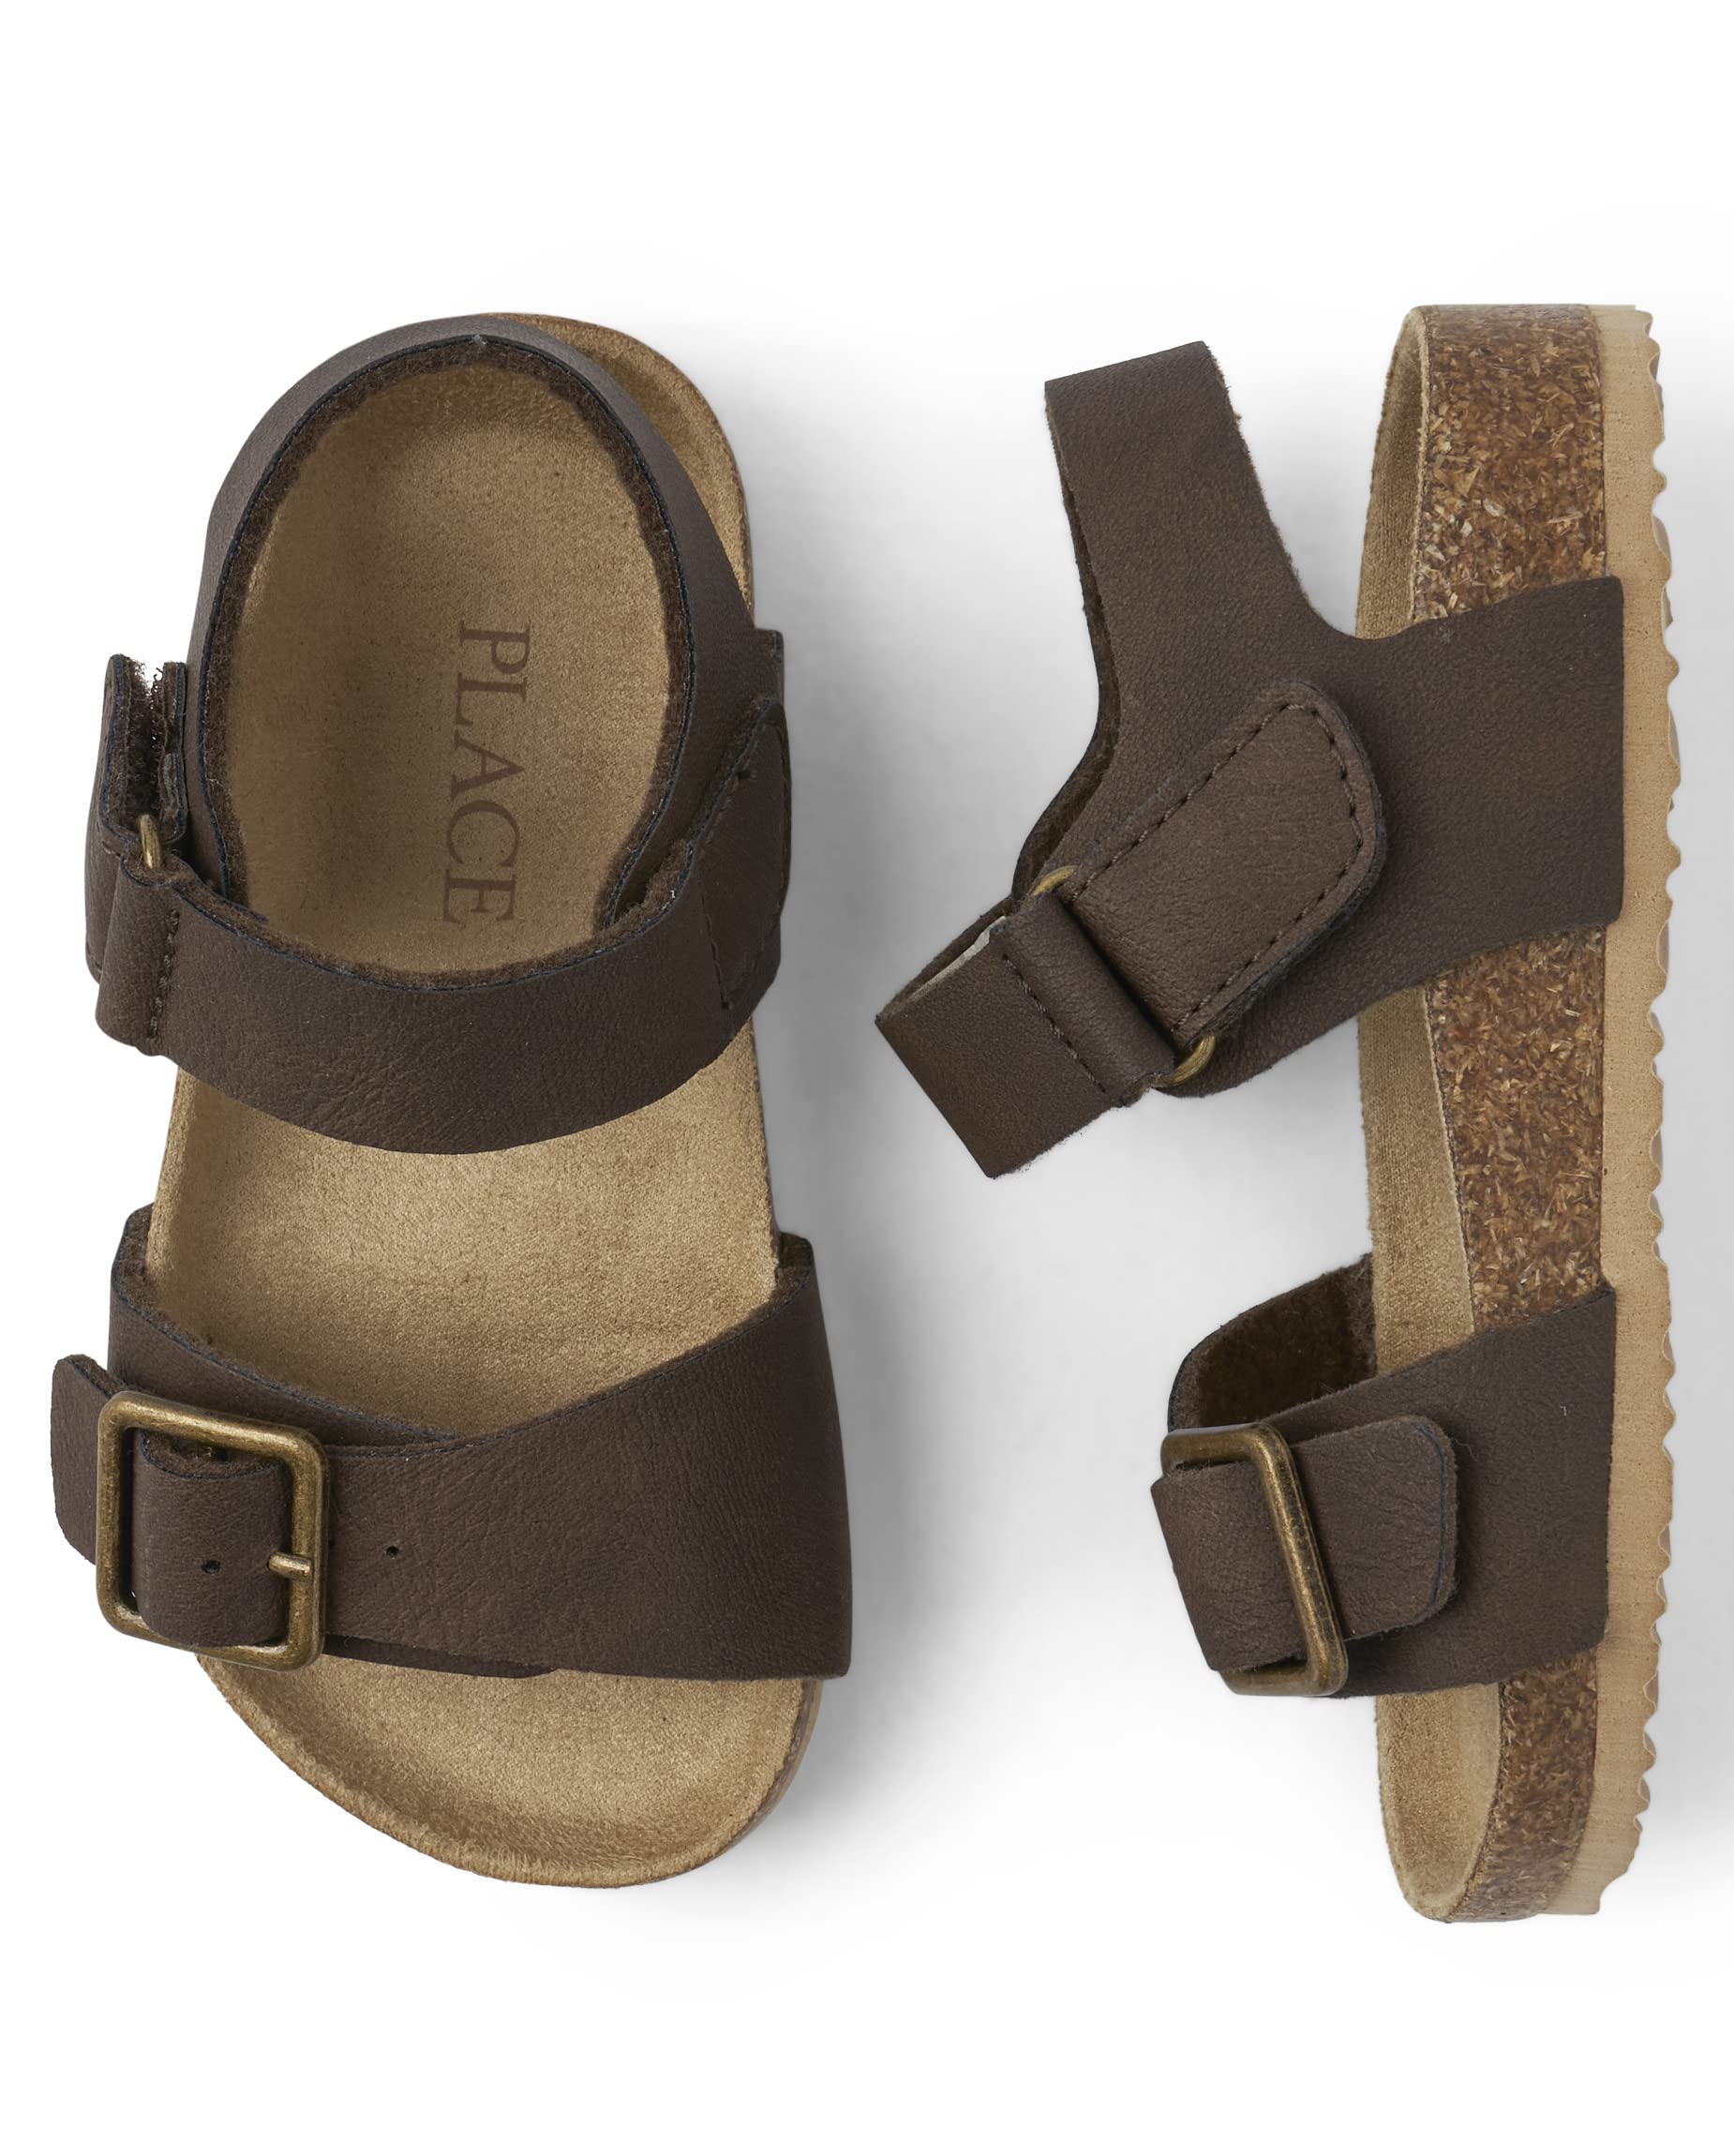 The Children's Place Toddler Boys Buckle Sandals Slide, Browns, 10